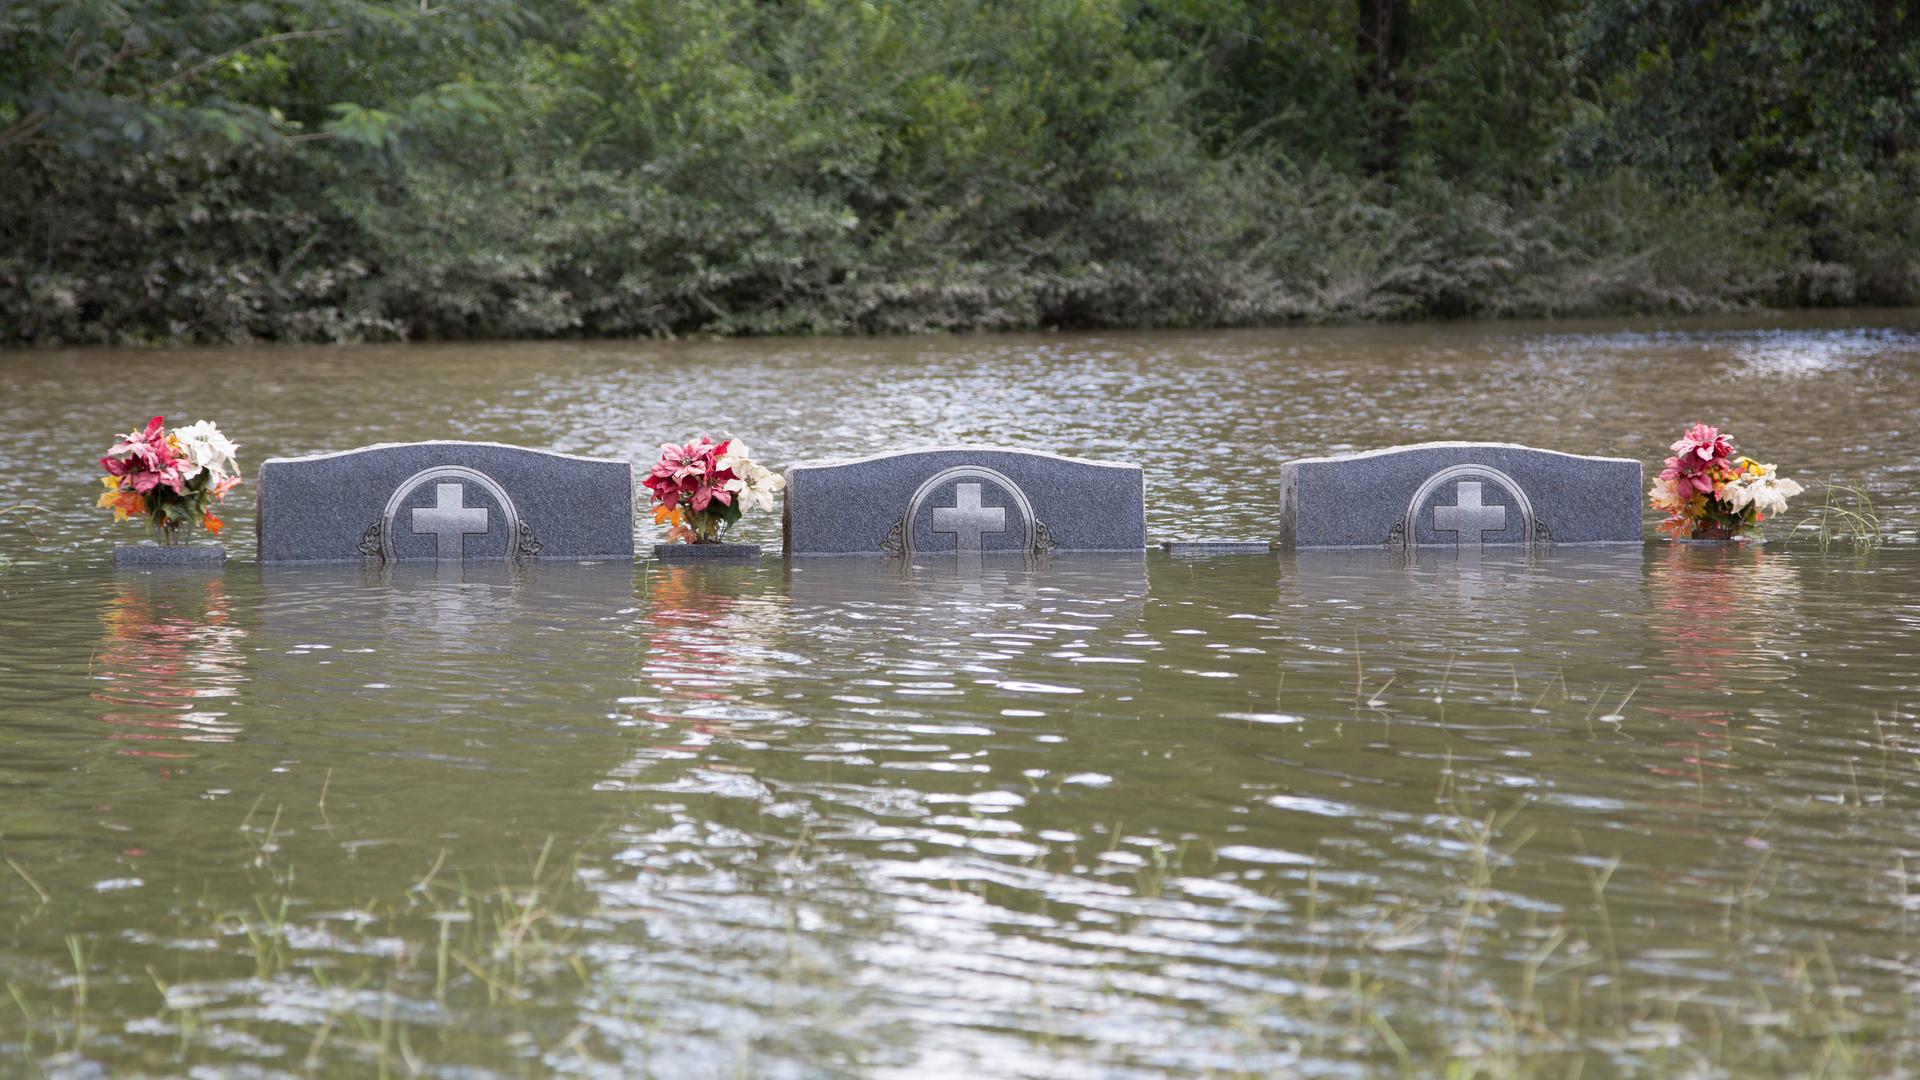 Floodwaters recede from a cemetary in Greenwell Springs, Louisiana on August 14th. More than two feet of rain fell on parts of the state in just a few days, flooding out roughly 40,000 homes and killing more than a dozen people.